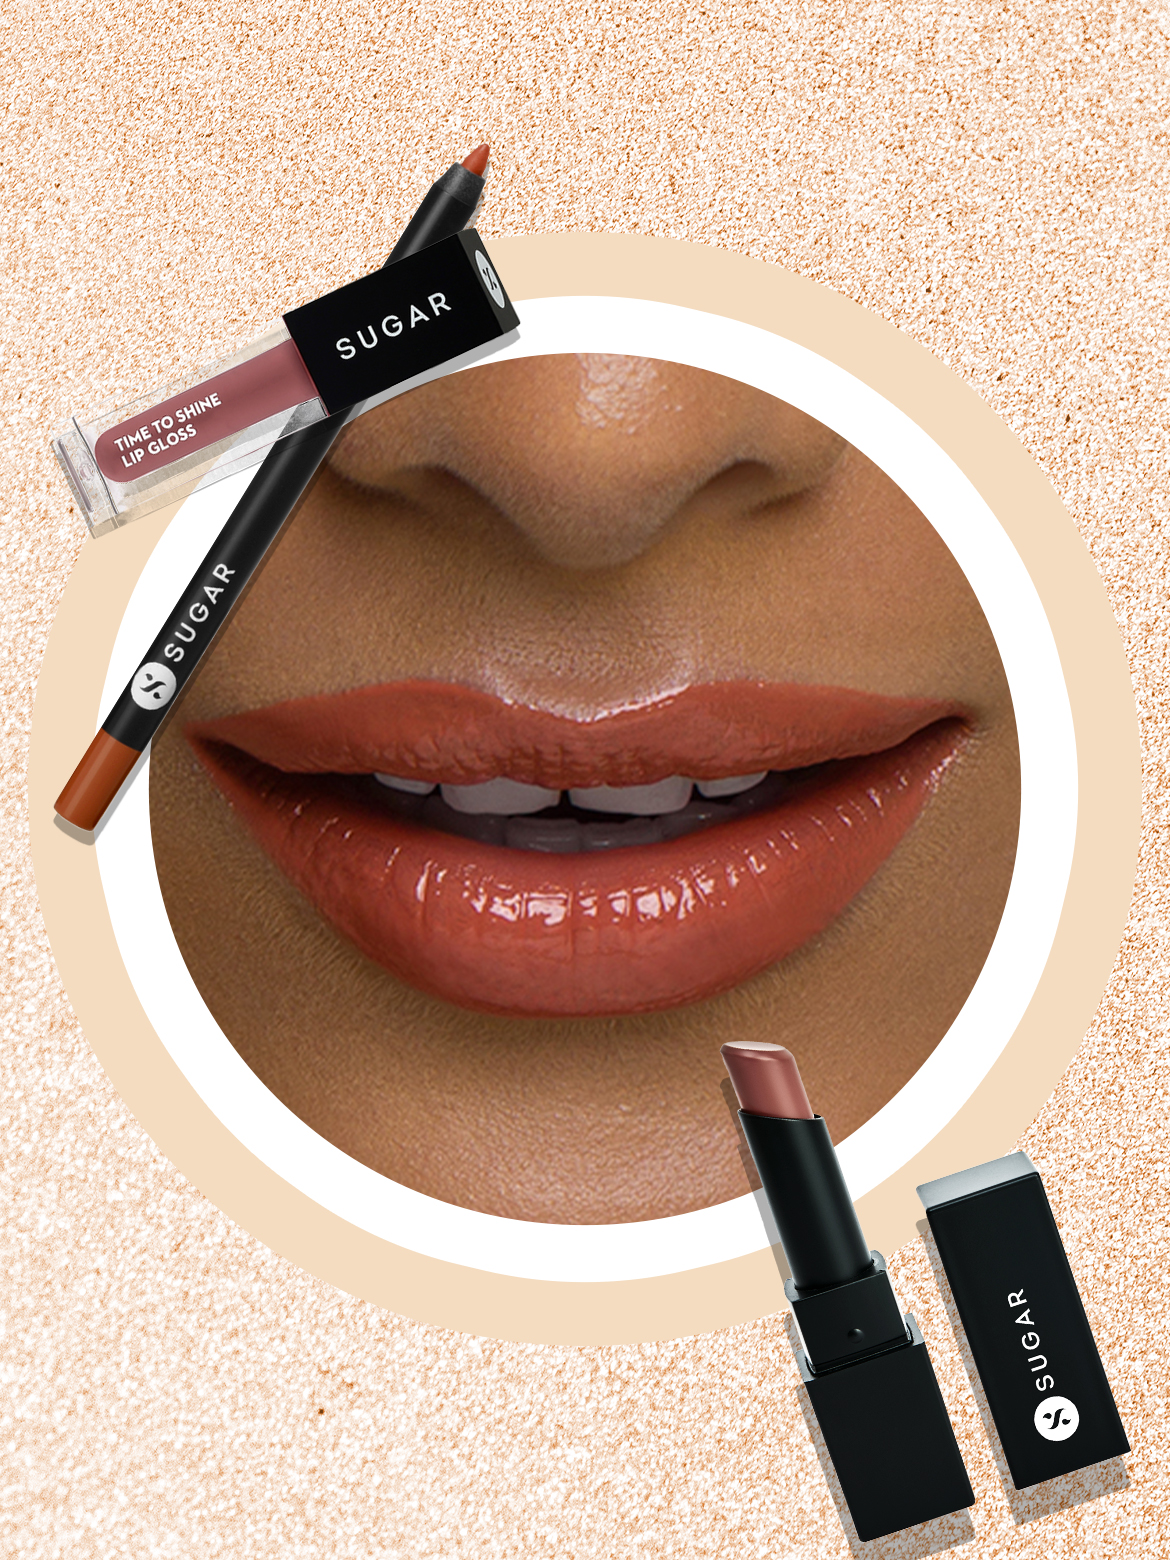 Try The Glass Lip Look In 5 Easy Steps - SUGAR Cosmetics